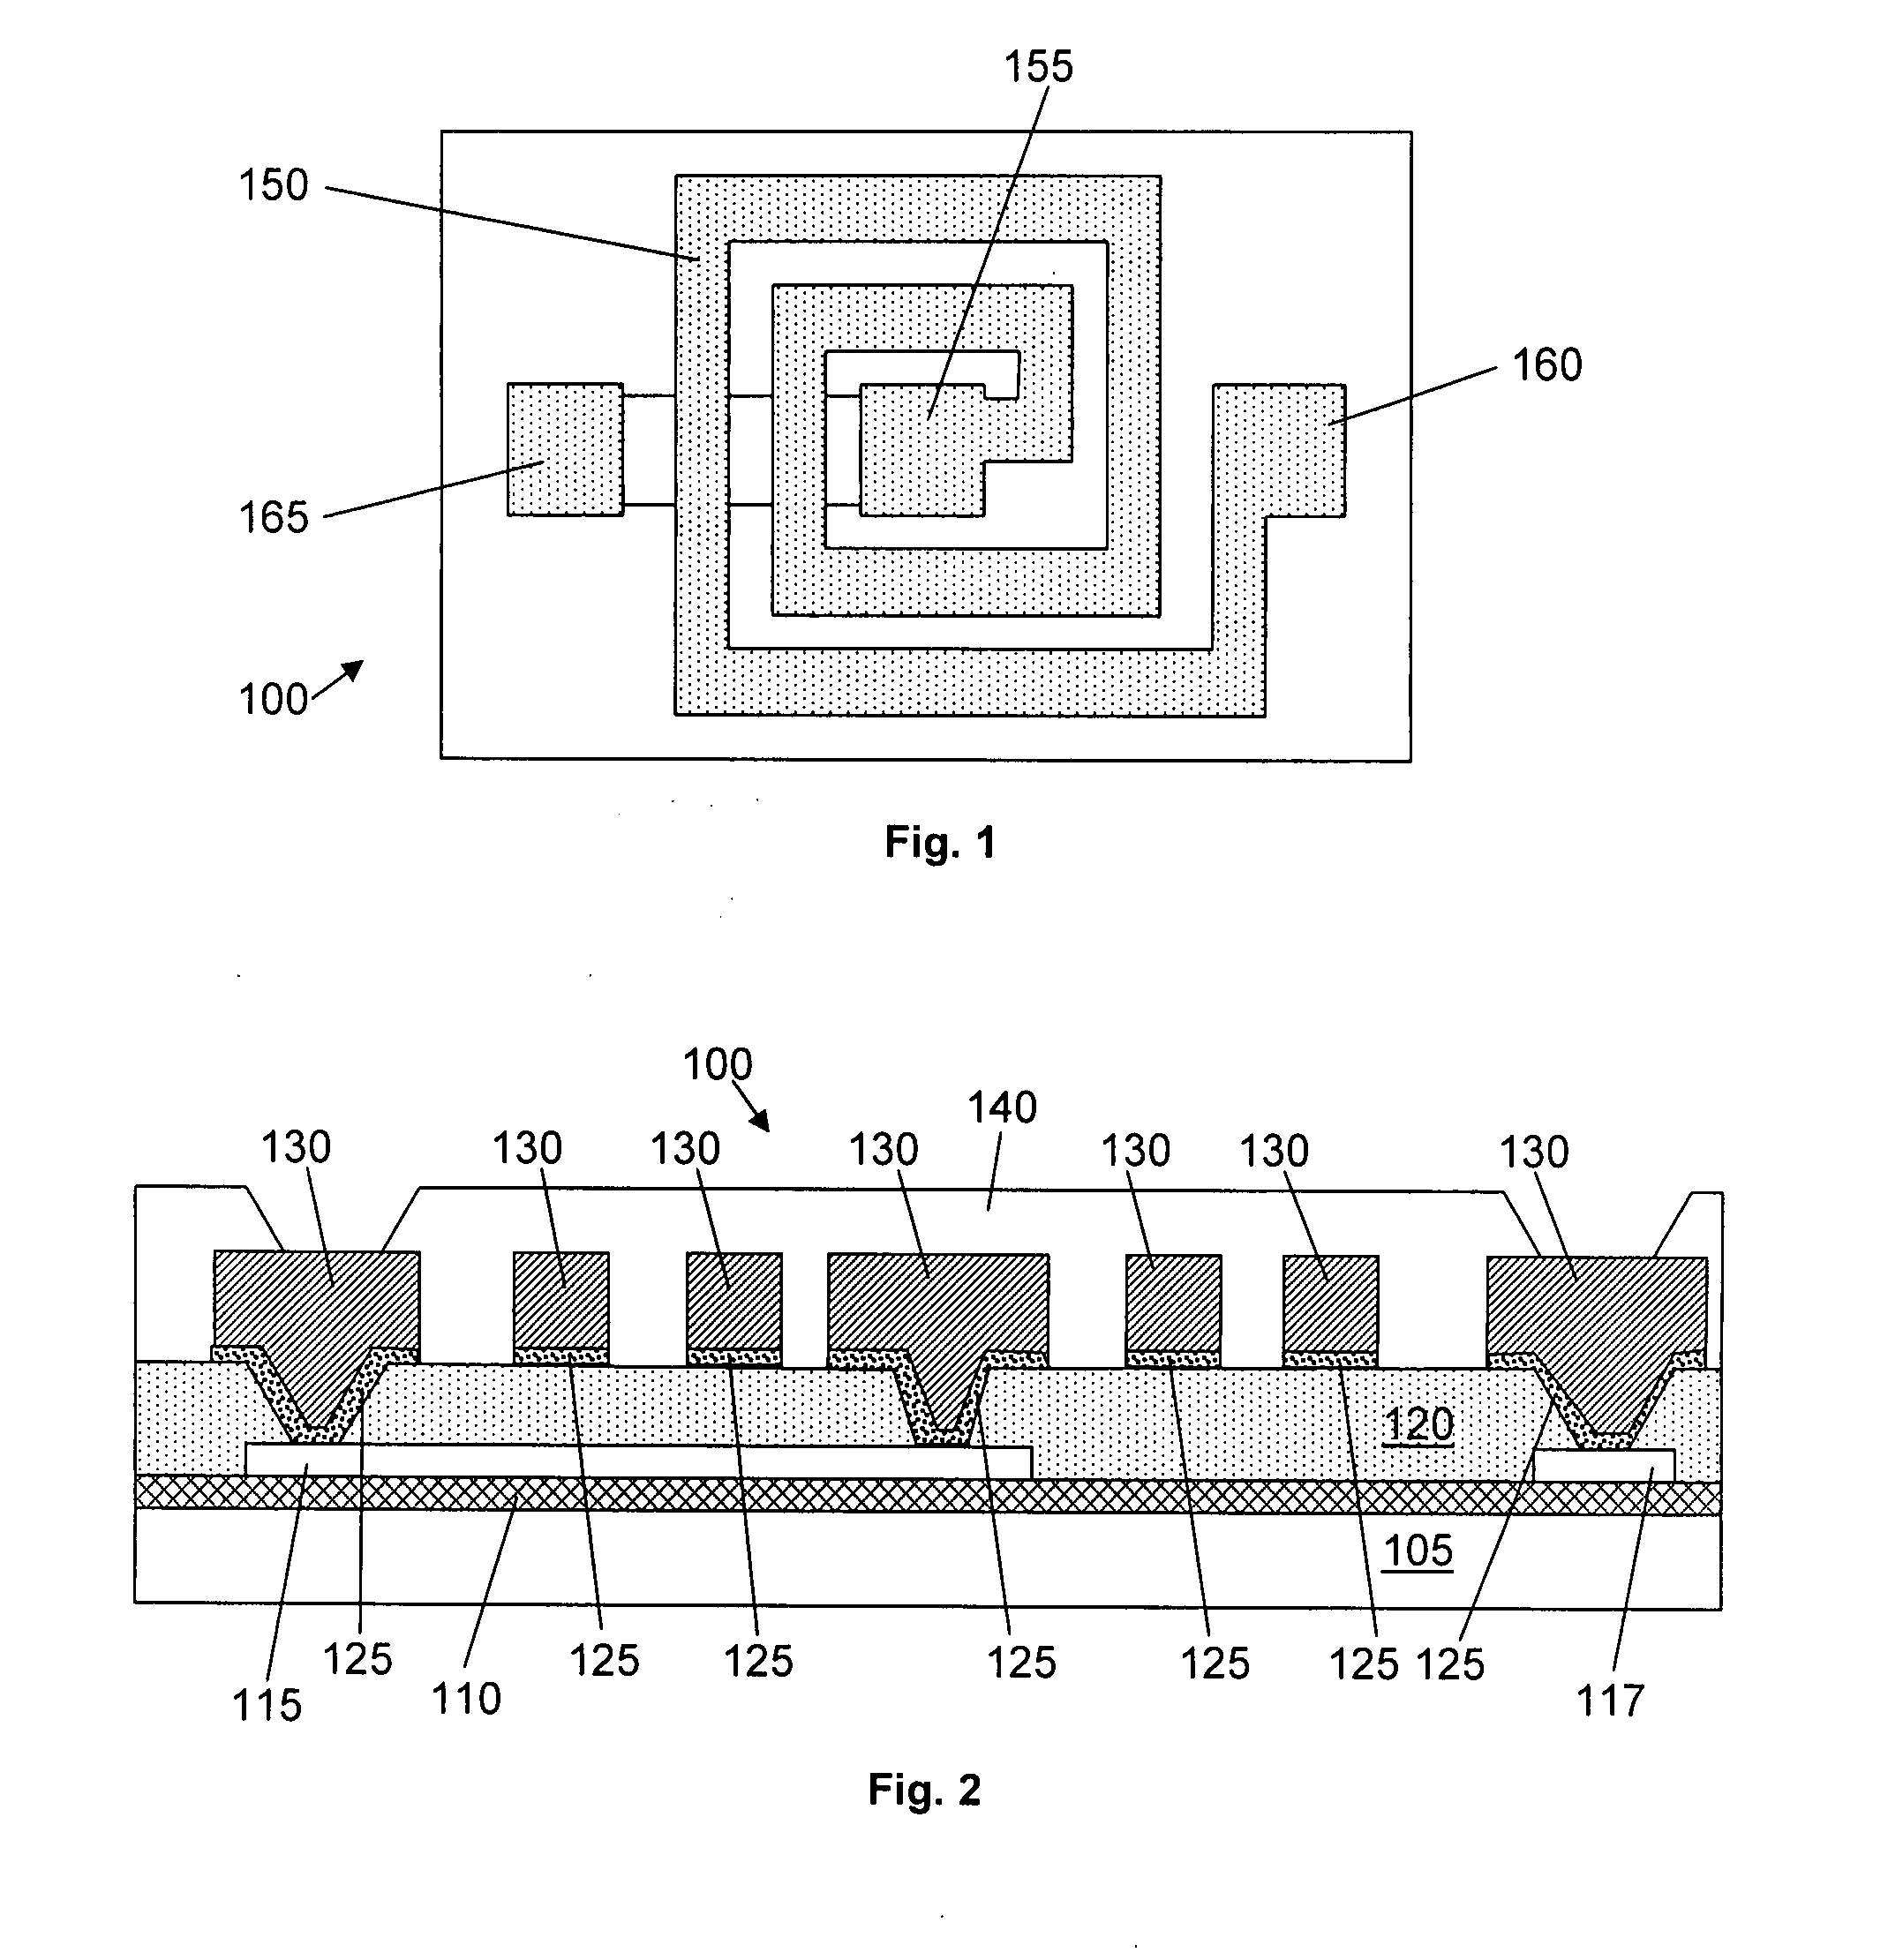 Chip scale power converter package having an inductor substrate